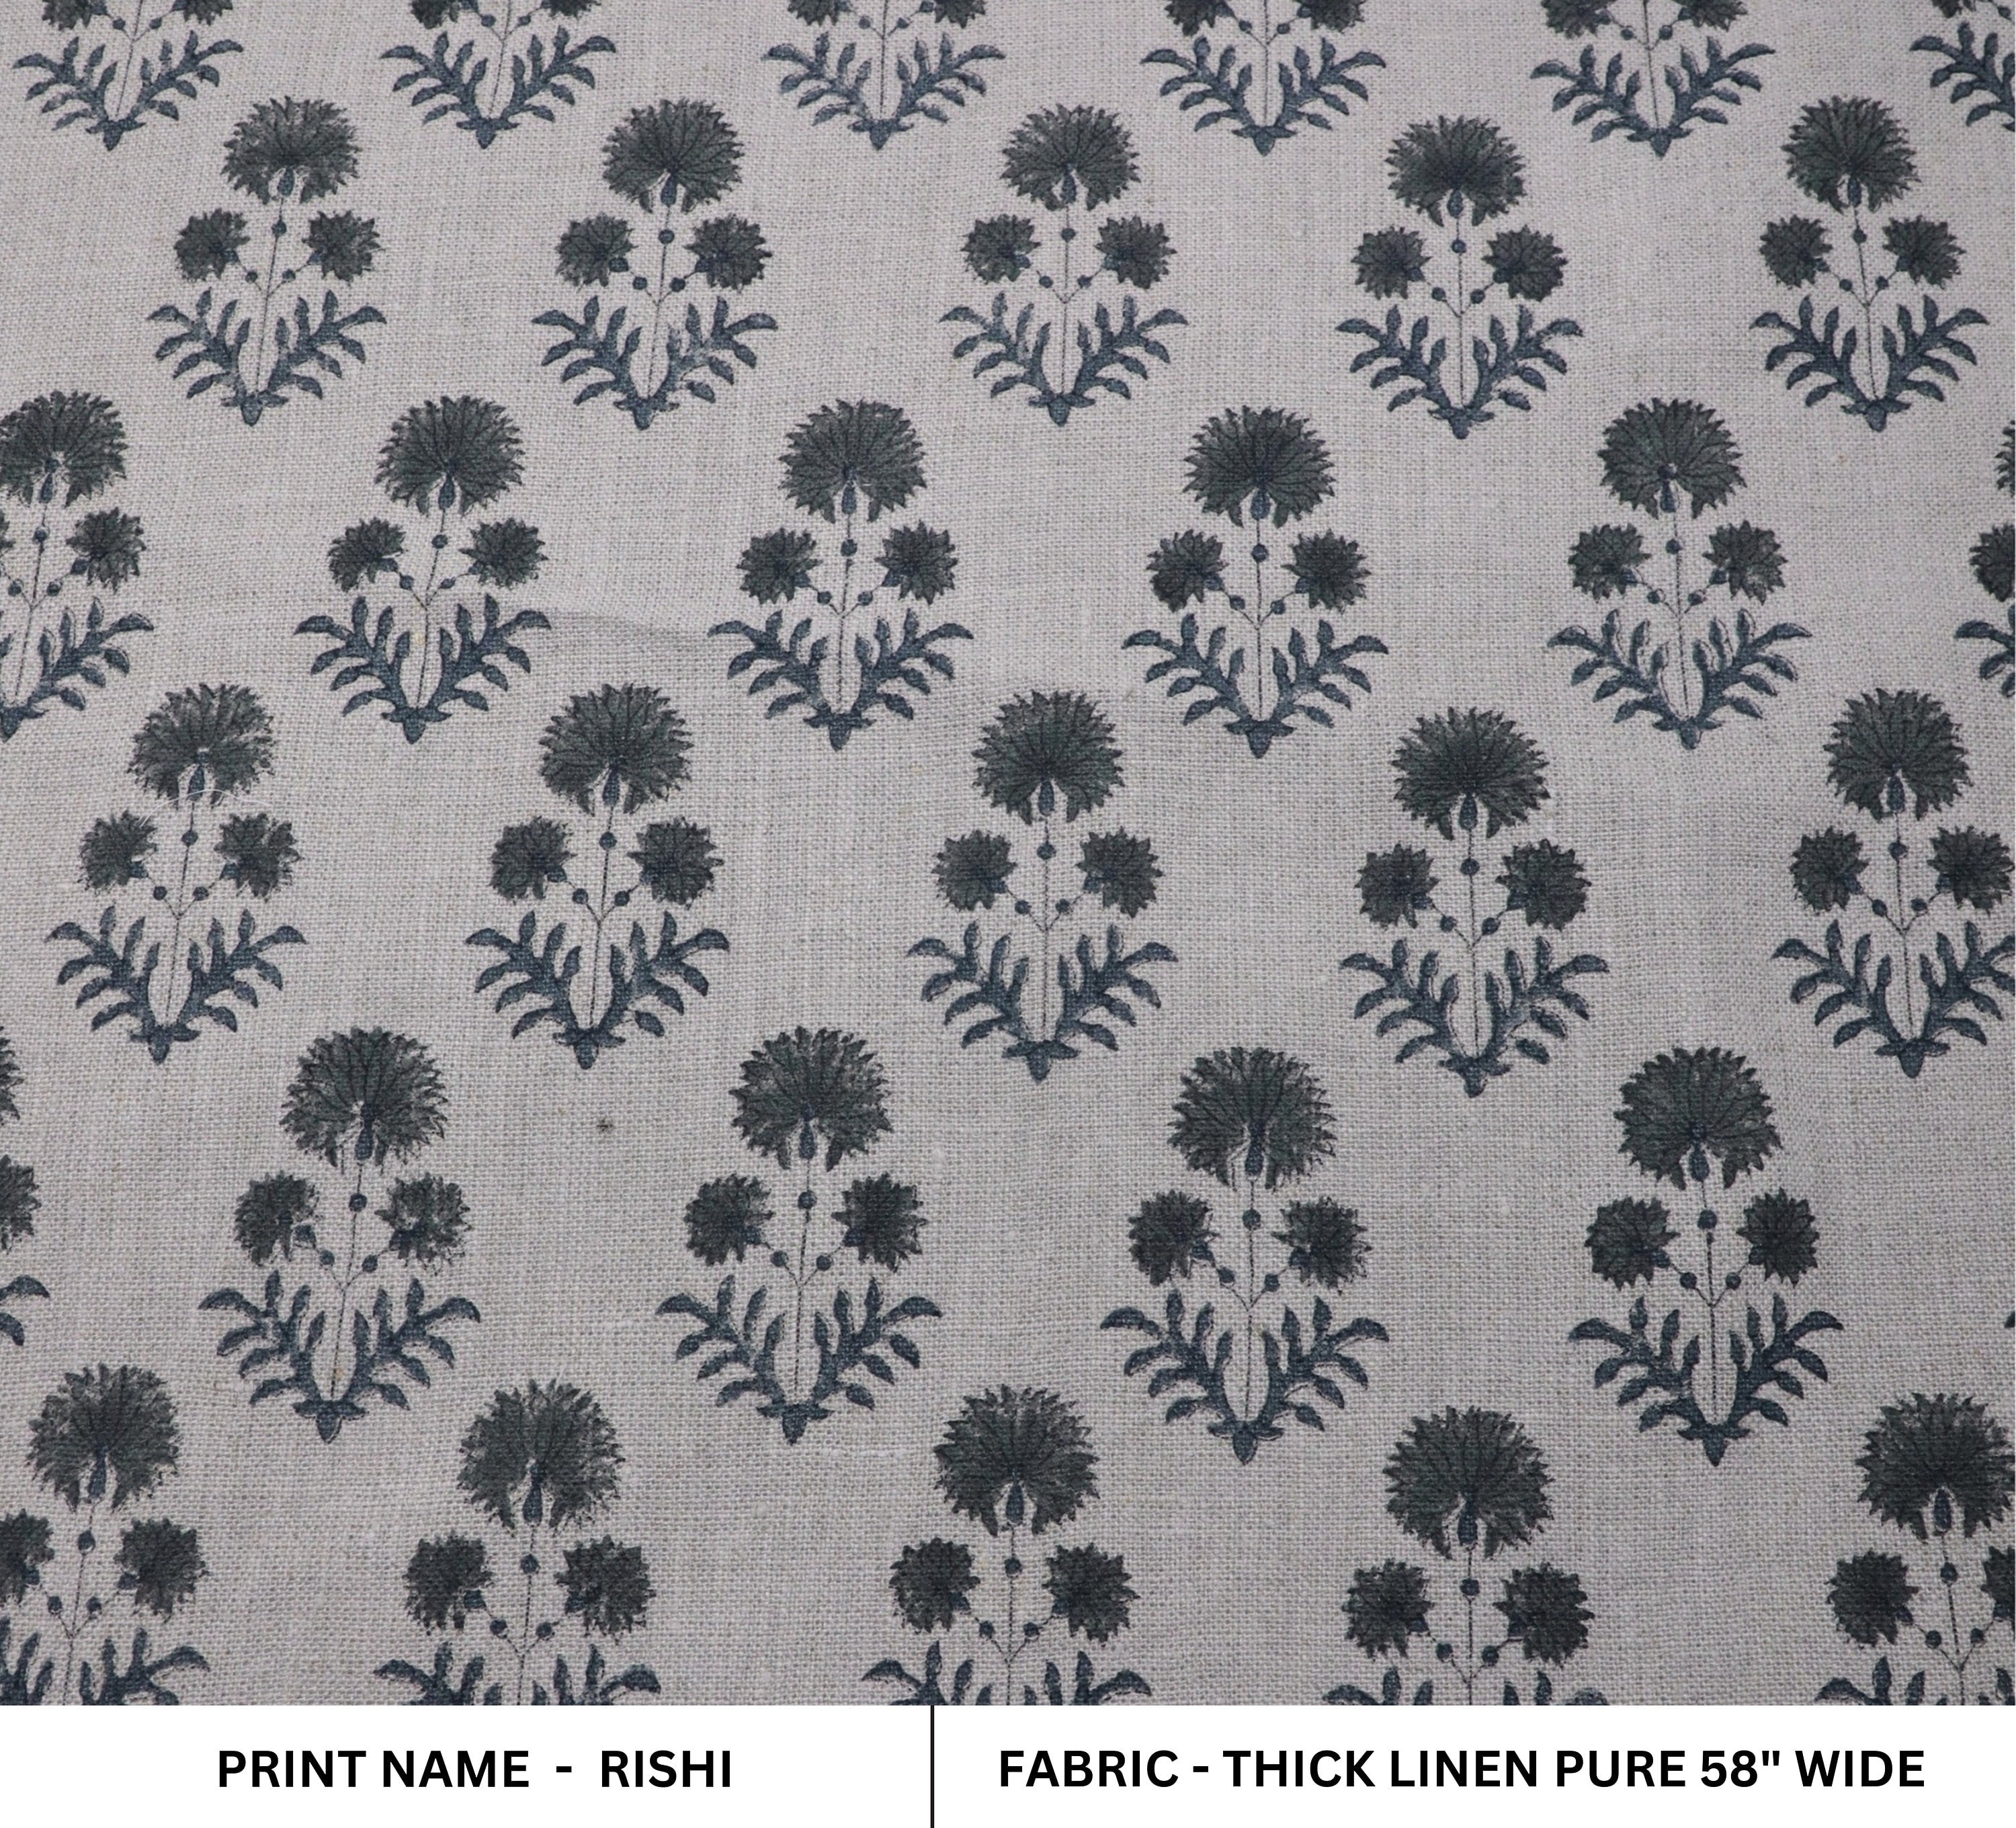 Hand block print, thick linen pure 58" wide, cushion floral fabric, linen tablecloth and napkins - RISHI